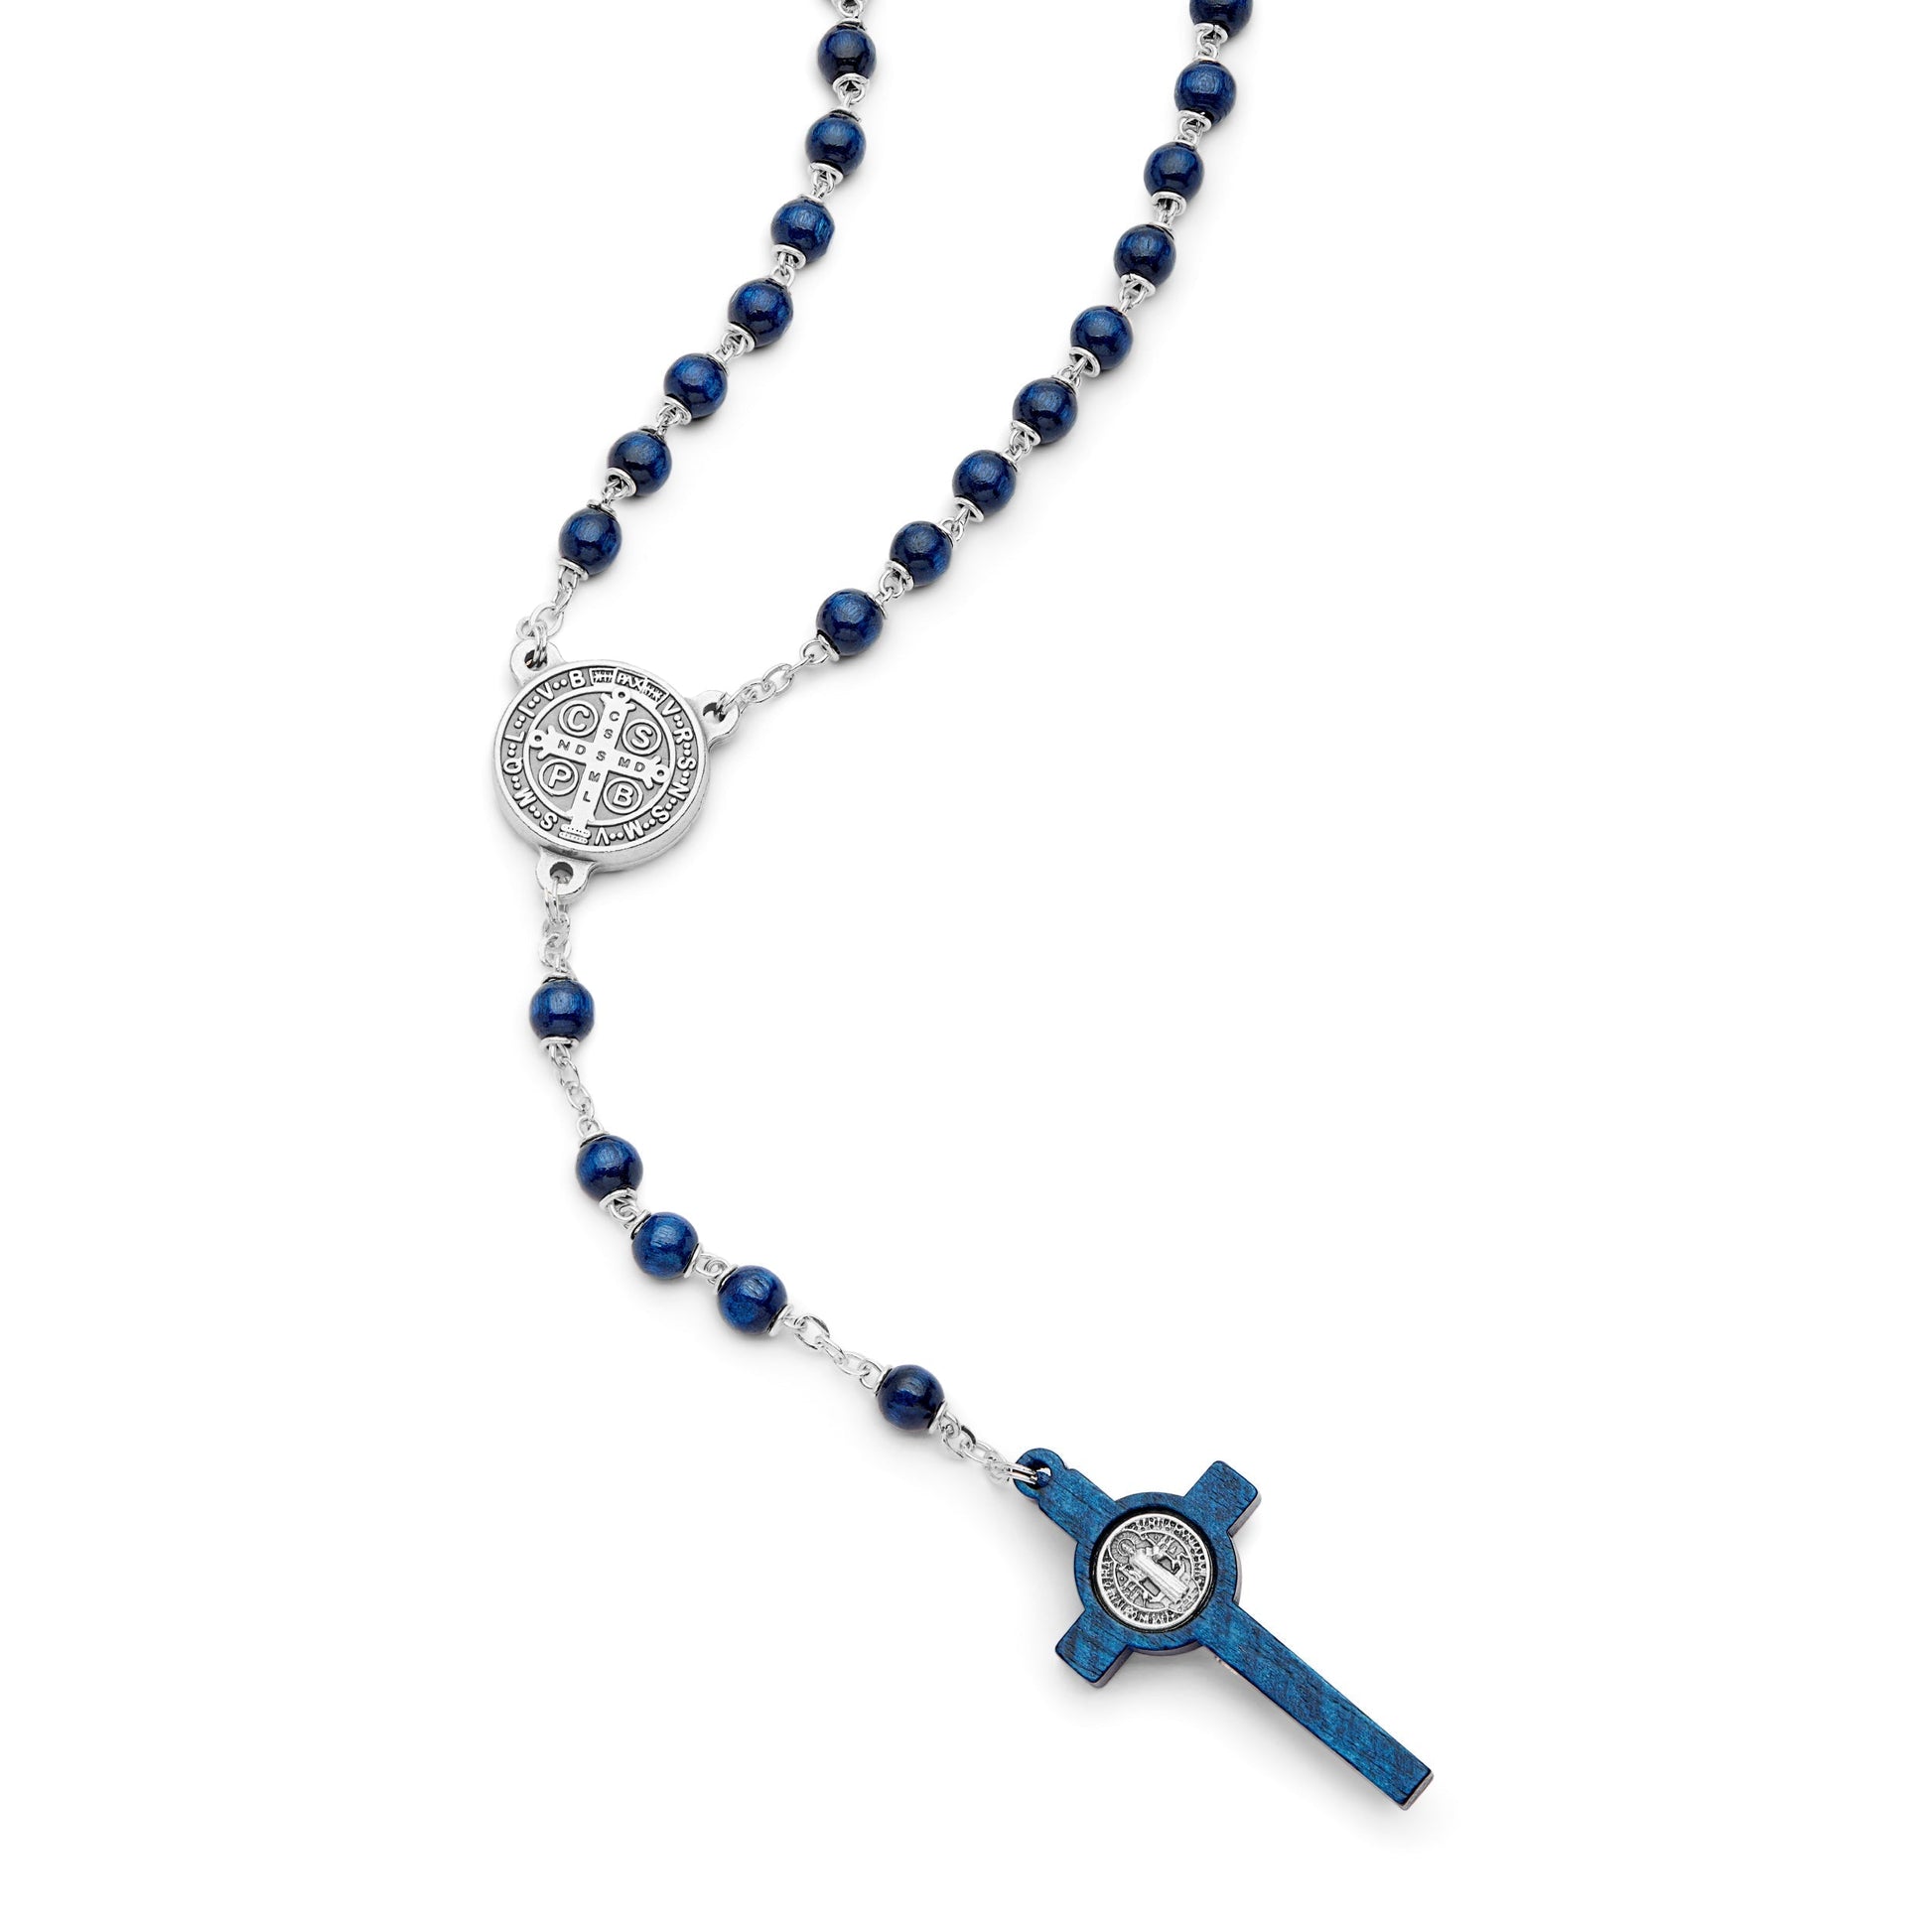 MONDO CATTOLICO Prayer Beads 49 cm (19.29 in) / 6 mm (0.23 in) Saint Benedict Blue Wooden Rosary